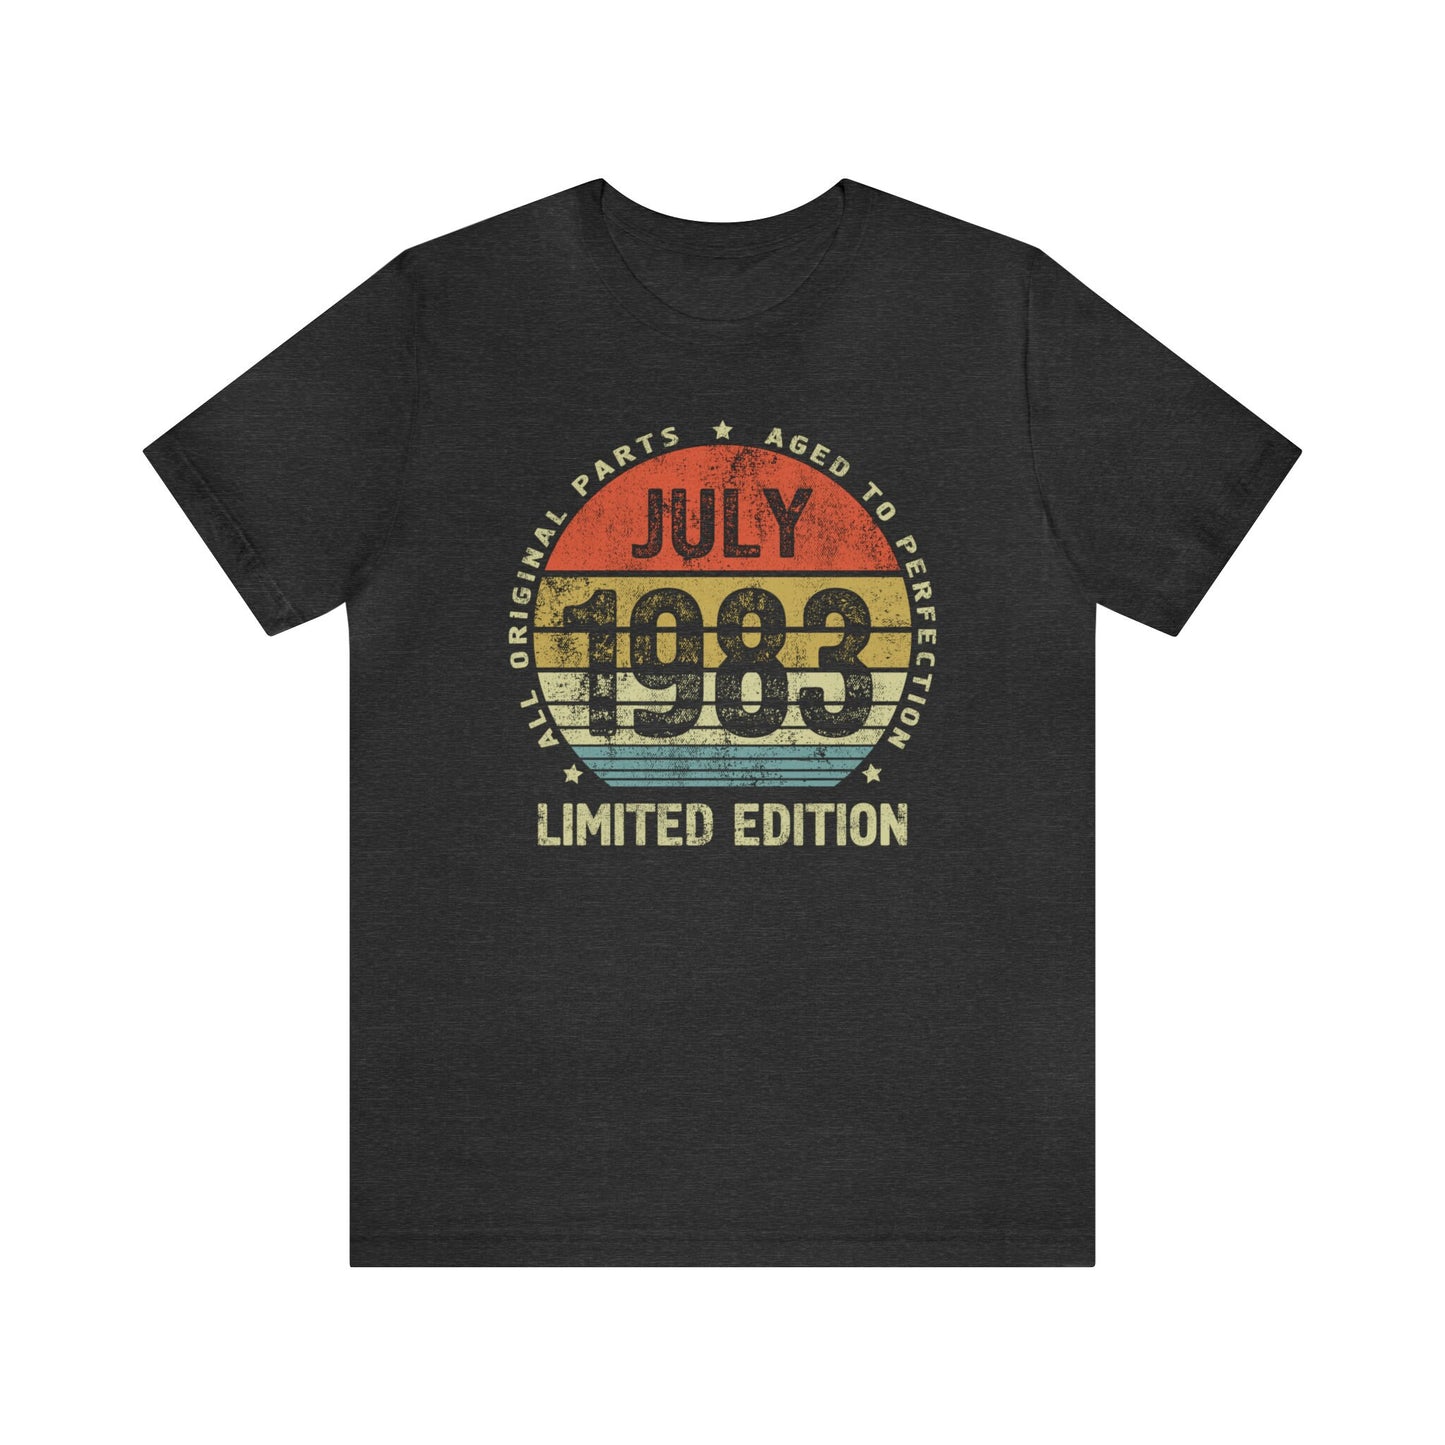 July 1983 birthday gift t-shirt for women or men,  shirt for sister or brother